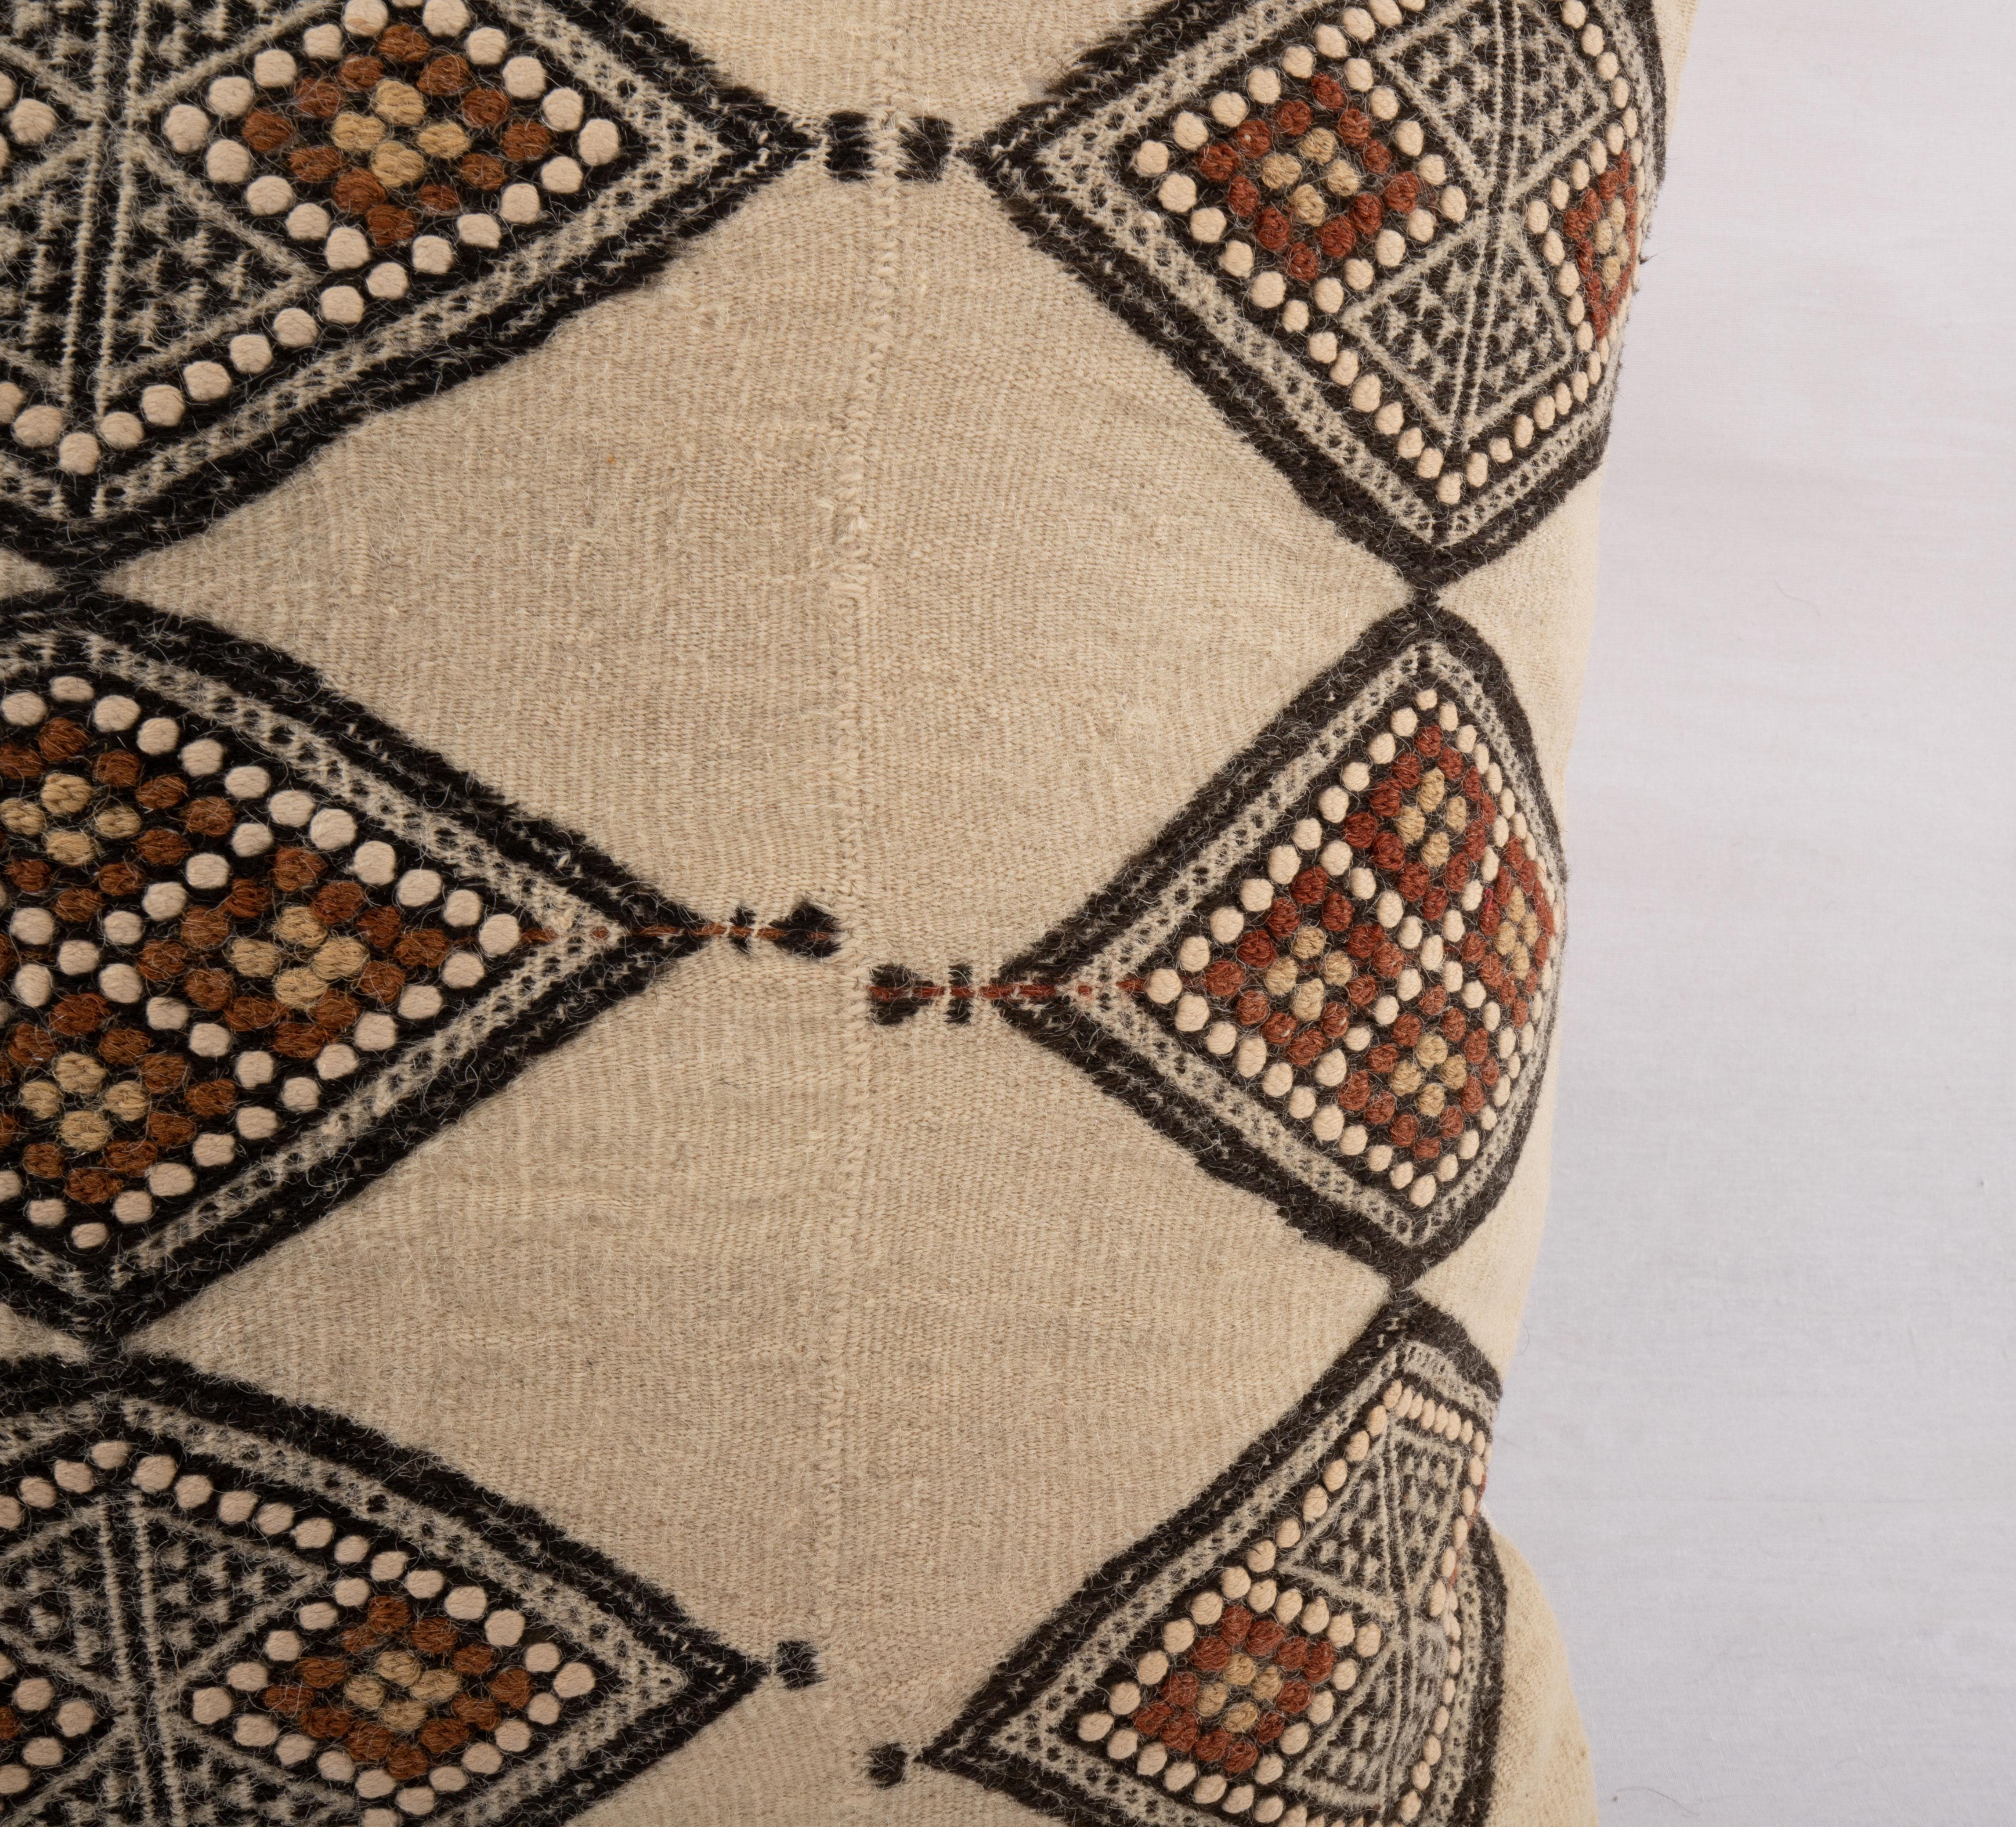 Hand-Woven Pillow Cover Made from a Vintage West African Fulani Blanket  